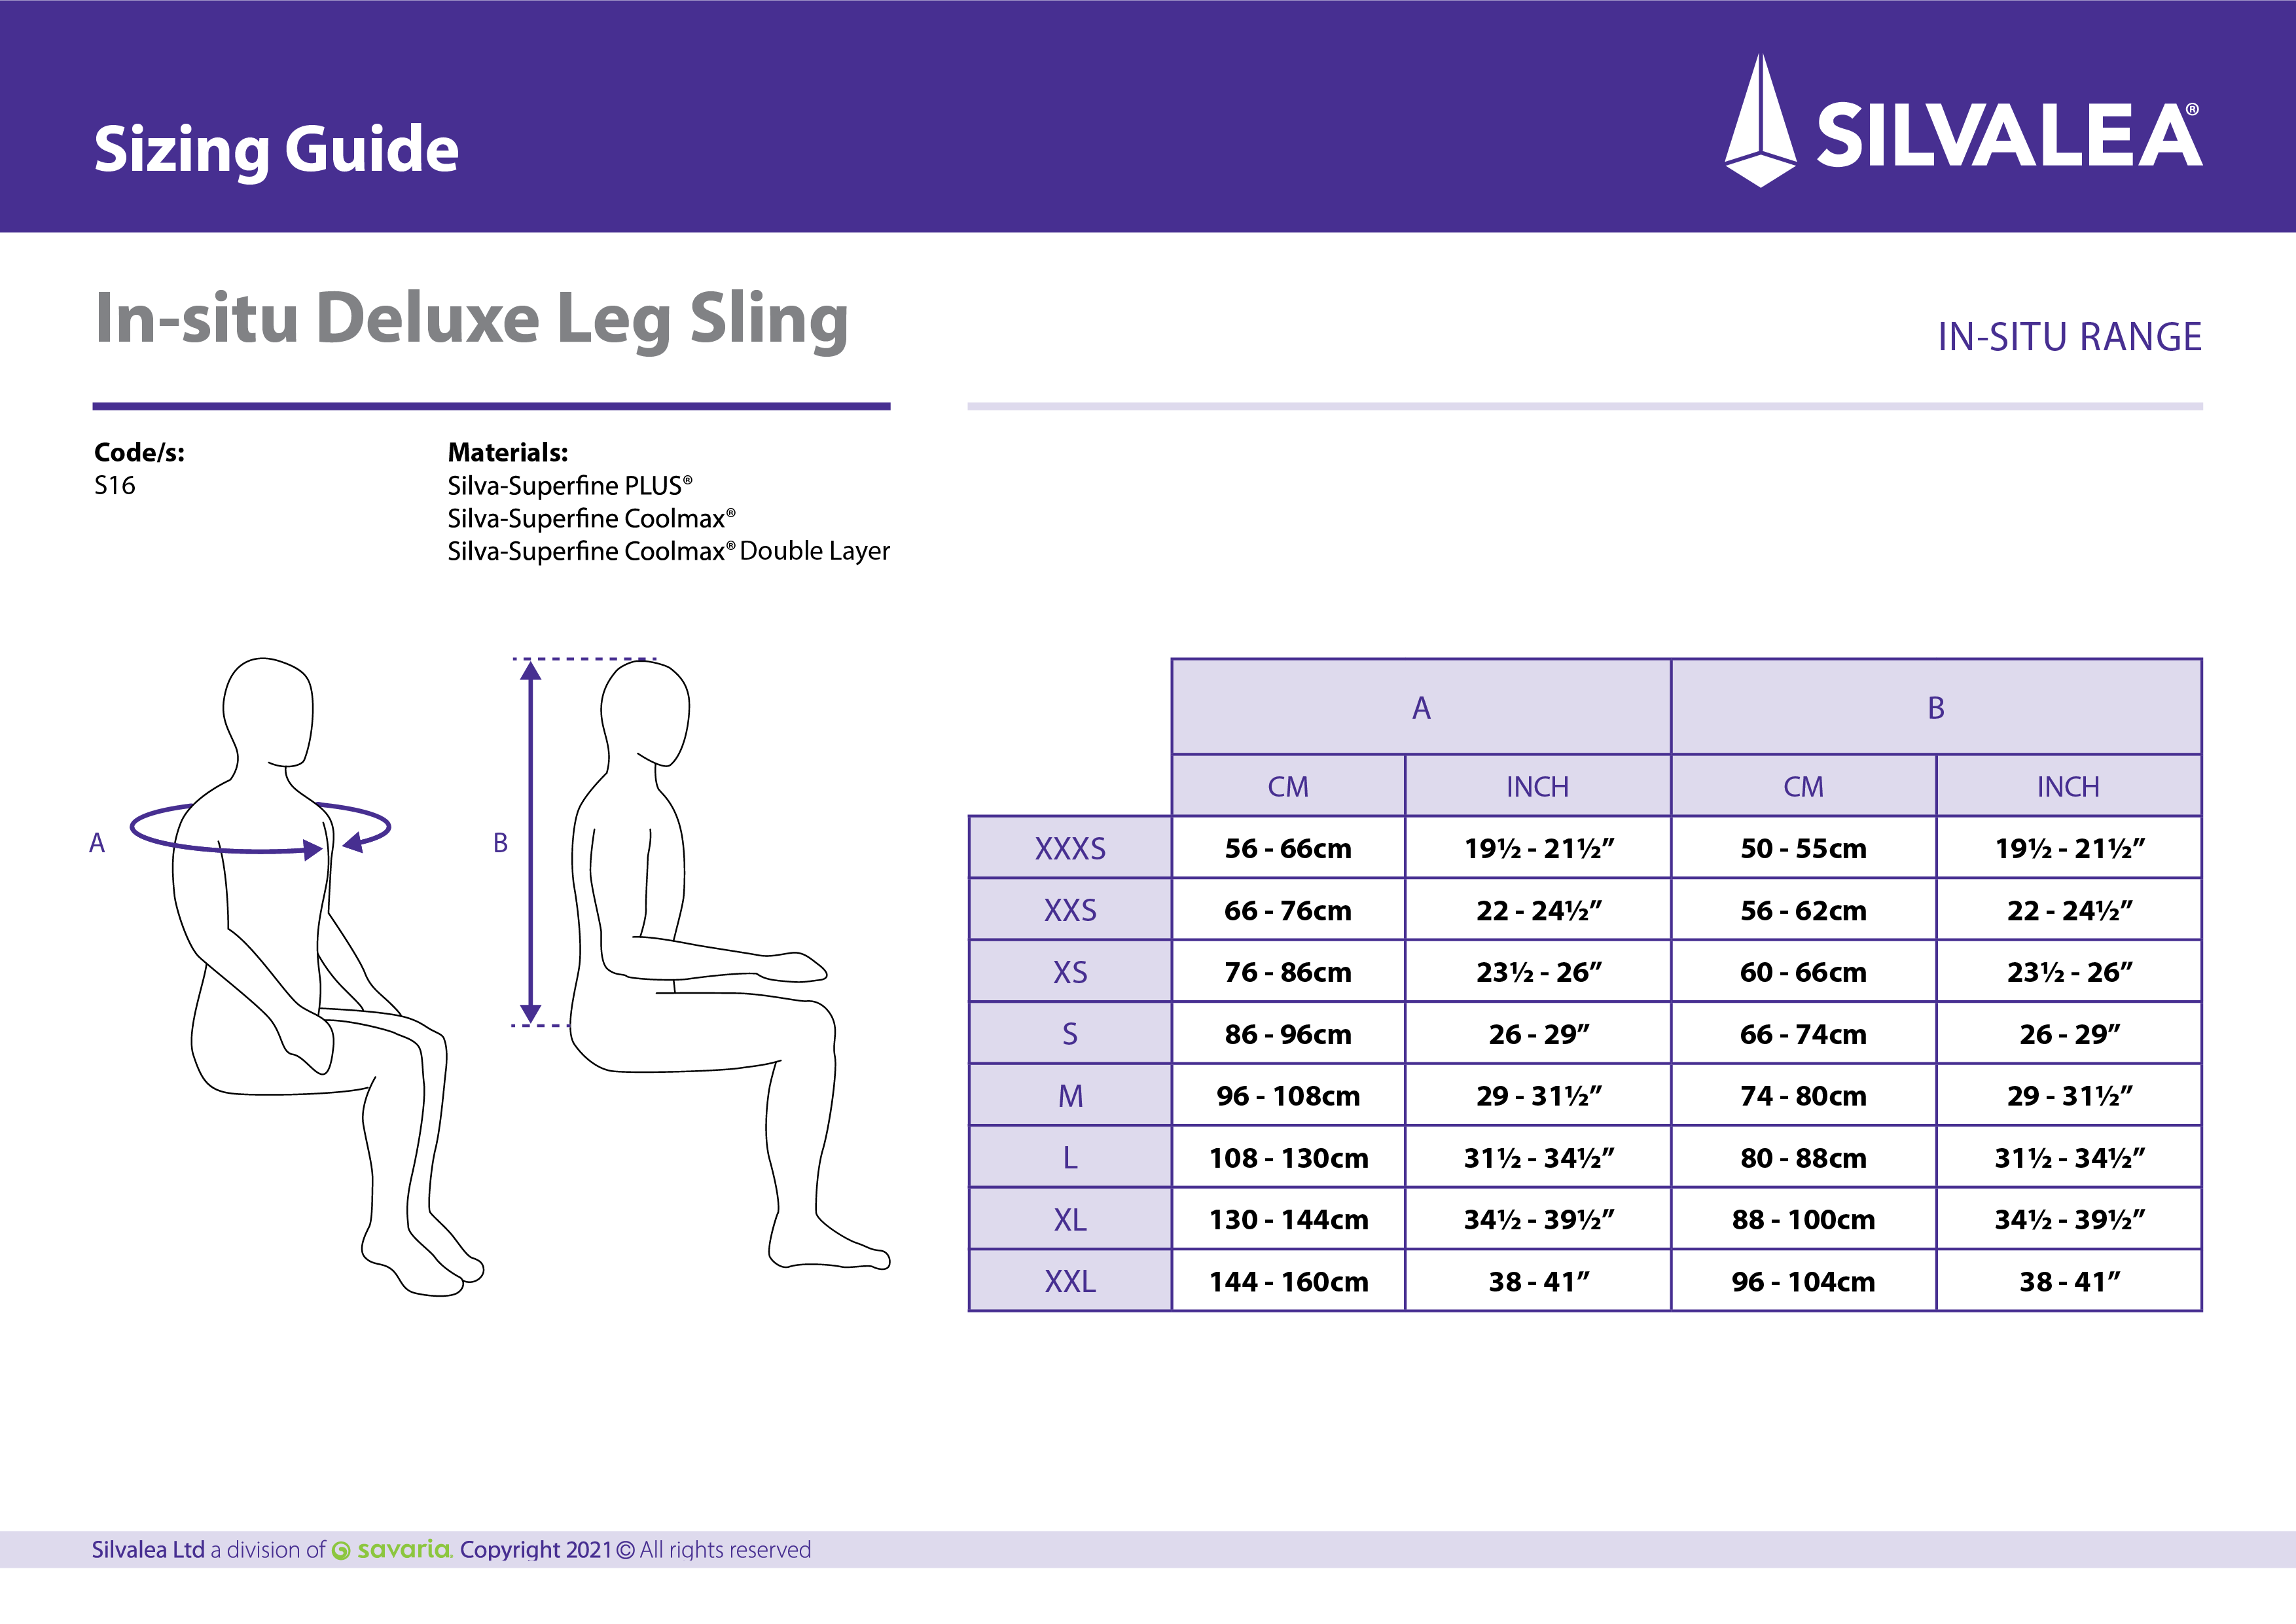 In-situ Deluxe Leg Sling Size Guide